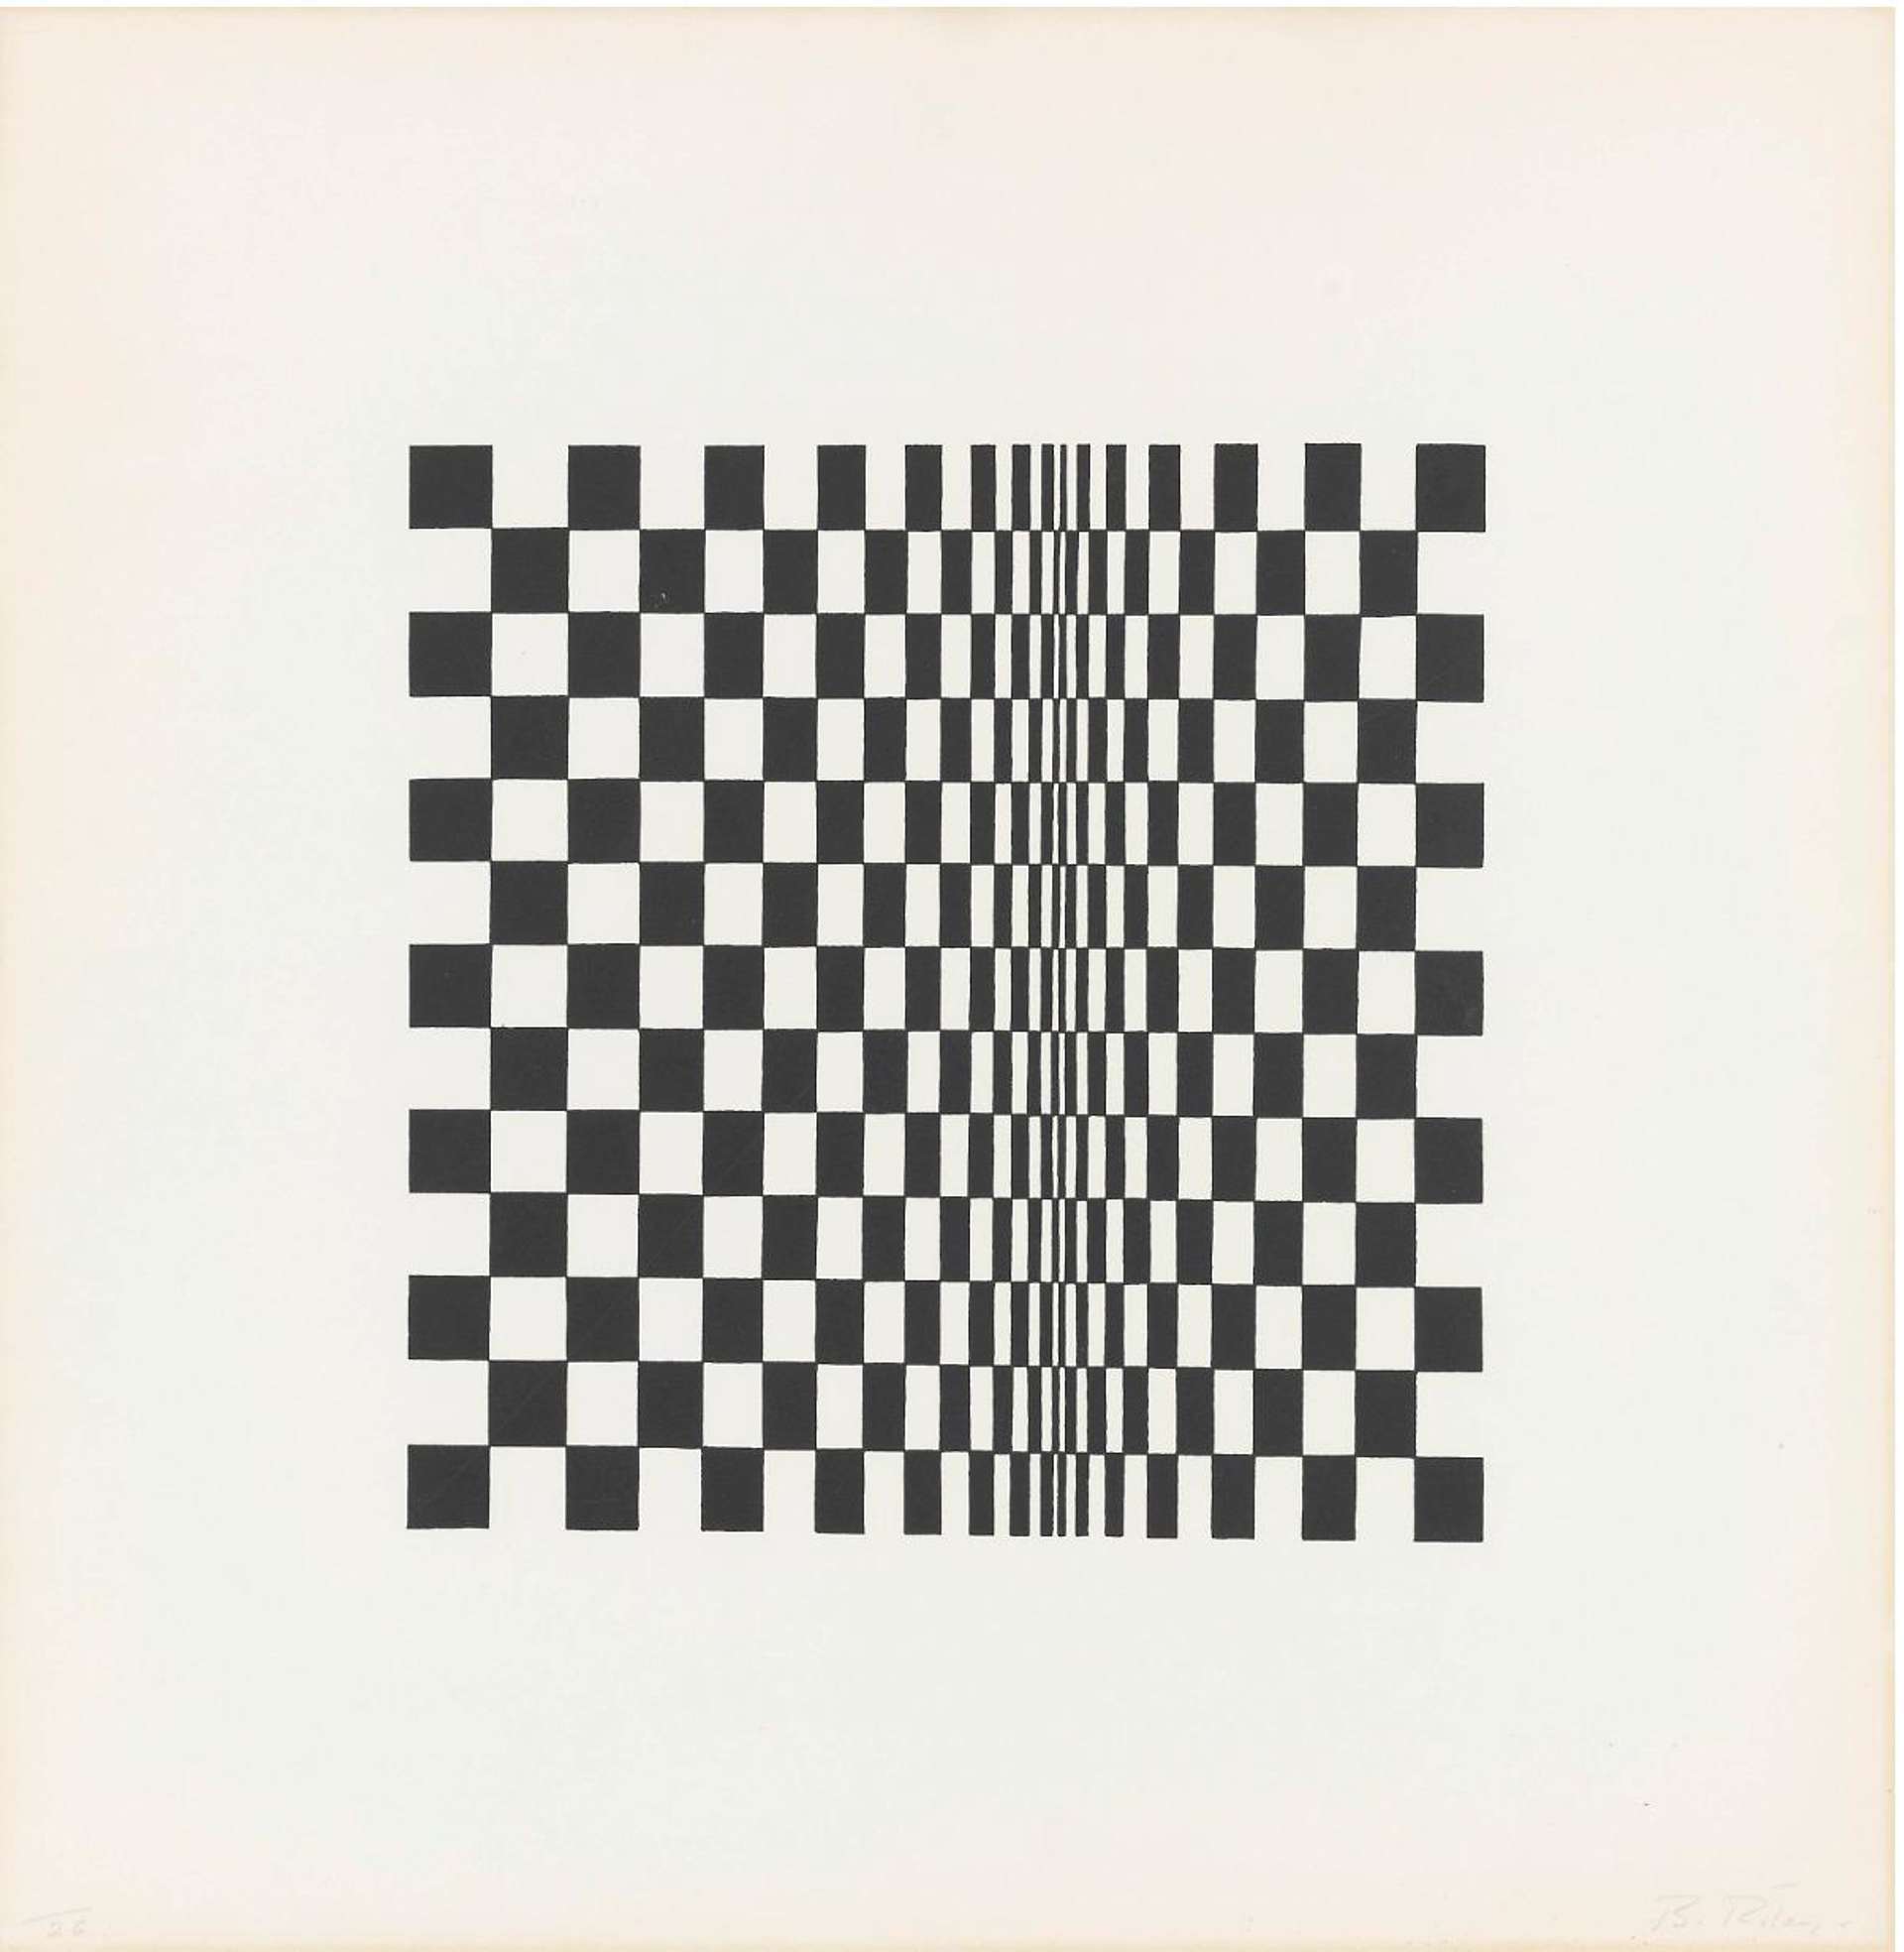 This print is modelled after Riley’s seminal 1961 painting, showing a monochrome checkerboard seemingly disappears into a vertical fold. 